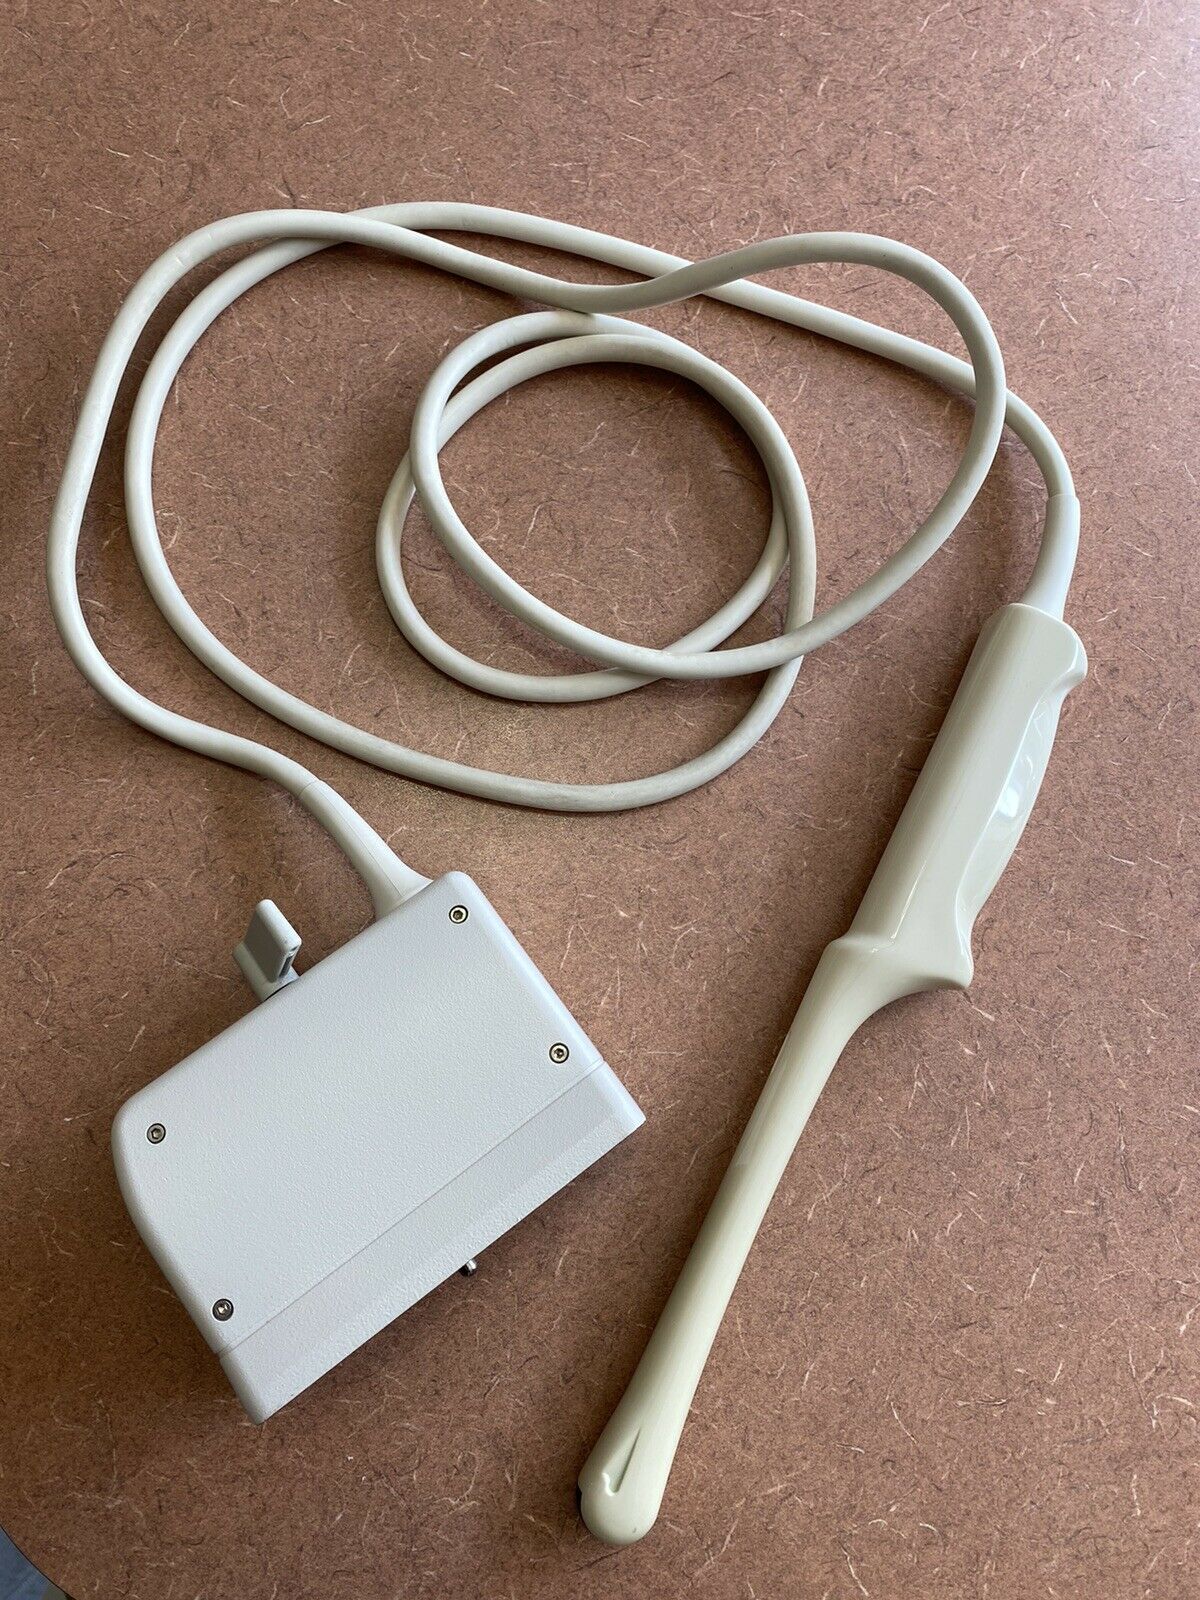 Philips C8-4V ATL IVT Curved Array Ultrasound Probe Compatible w/ HDI 5000 DIAGNOSTIC ULTRASOUND MACHINES FOR SALE